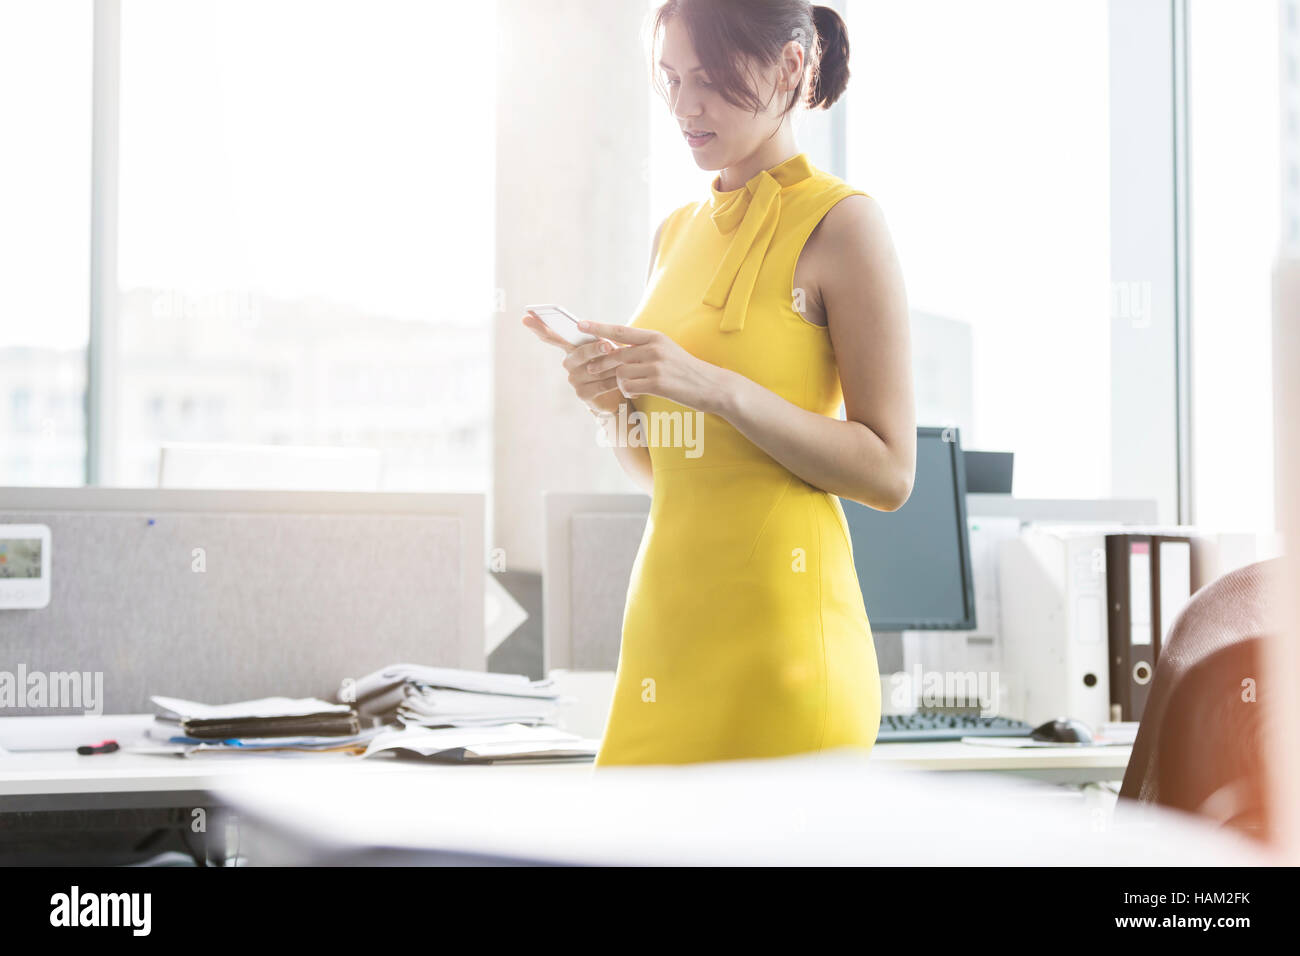 Businesswoman texting with cell phone in office Banque D'Images